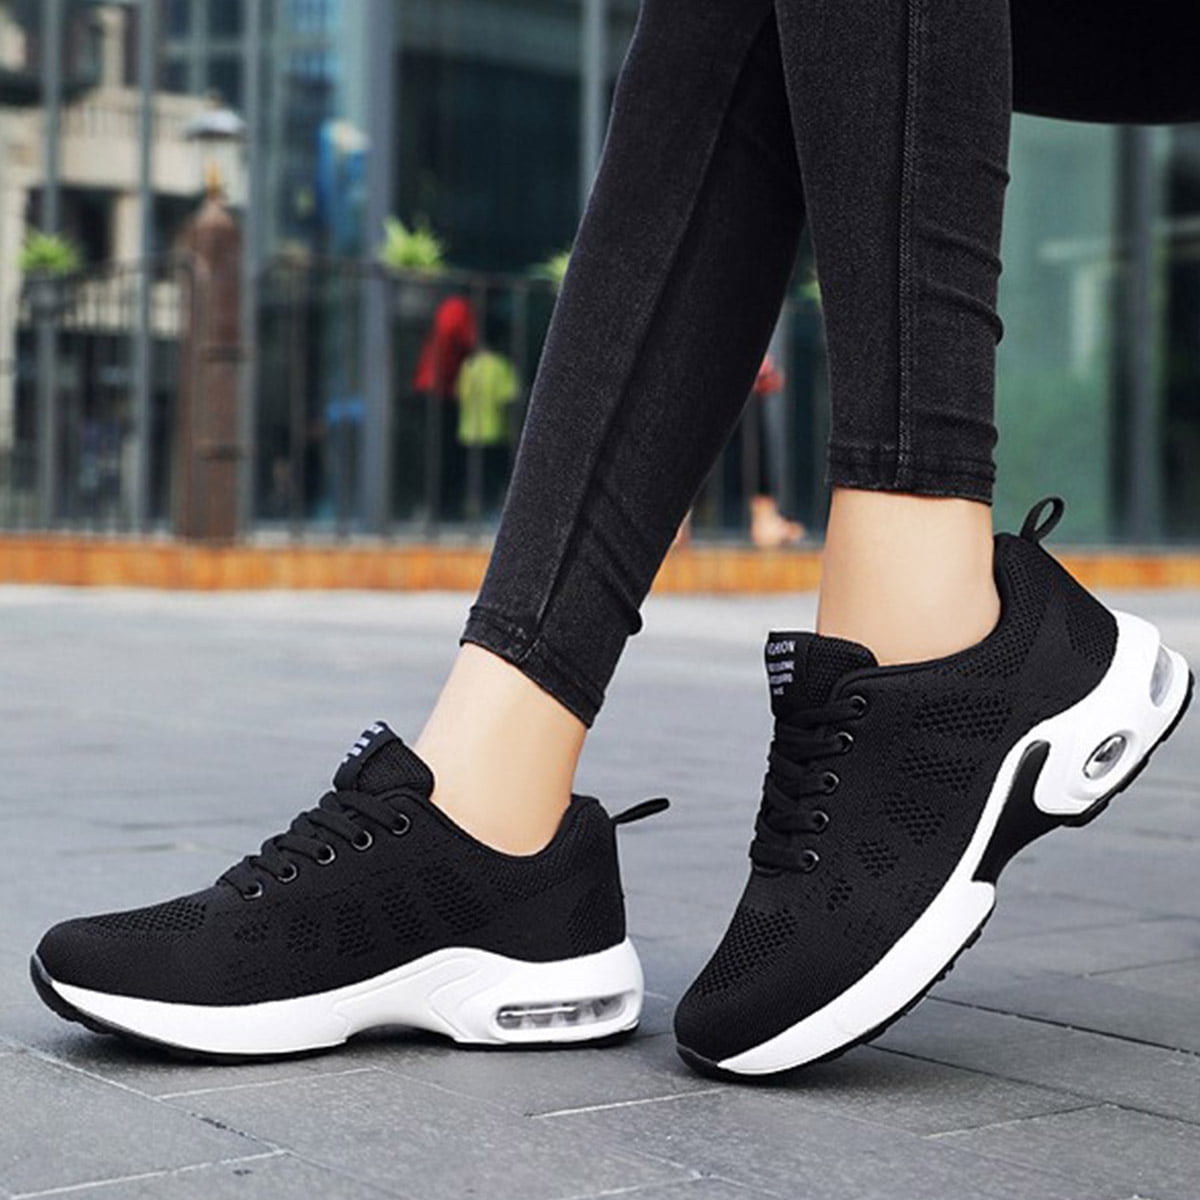 Details about   Women's Sneakers Flat Fashion Trainers Shoes Breathable Sport Athletic Sneakers 